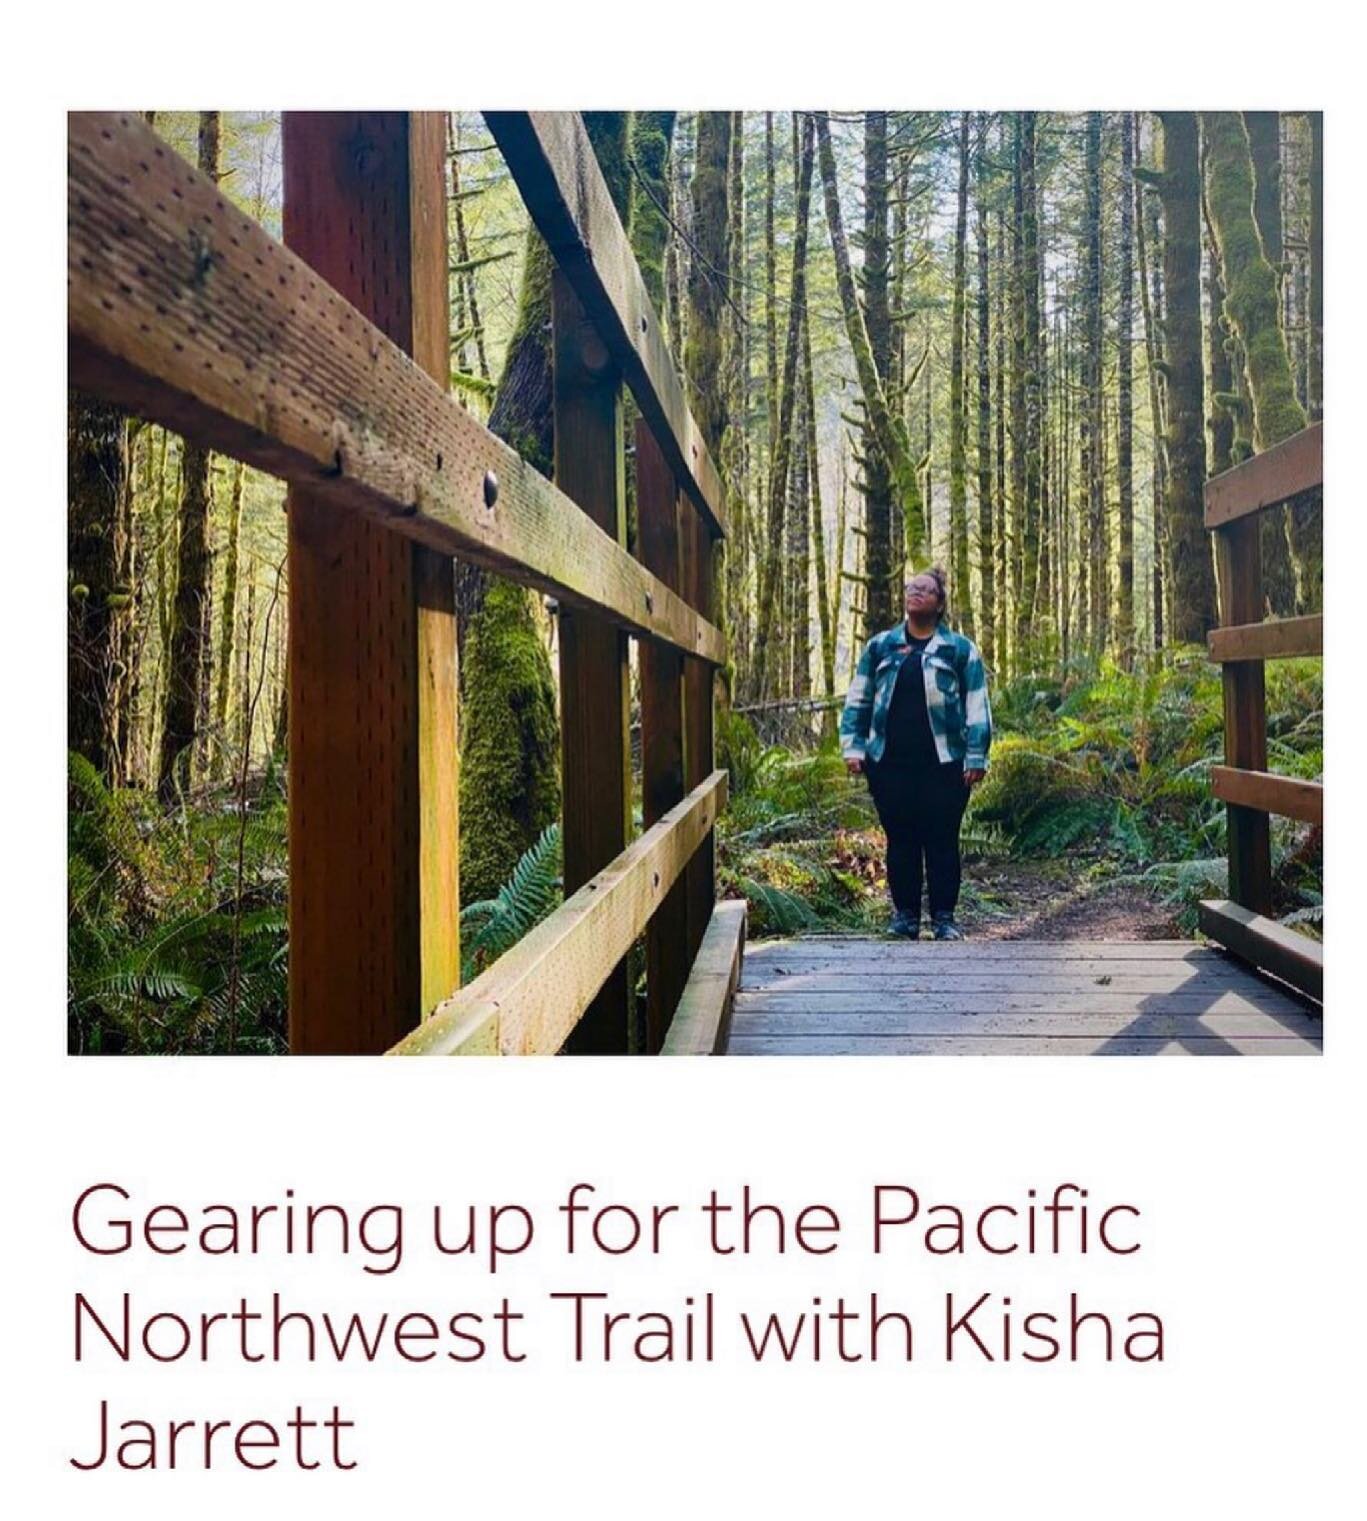 Kisha had the chance to chat with Adam Edwards from Melanin Base Camp about her non-traditional pathway to the outdoors and how she is preparing to hike the #PNT as a plus-sized Black woman living with lupus. Read the full story at melaninbasecamp.co